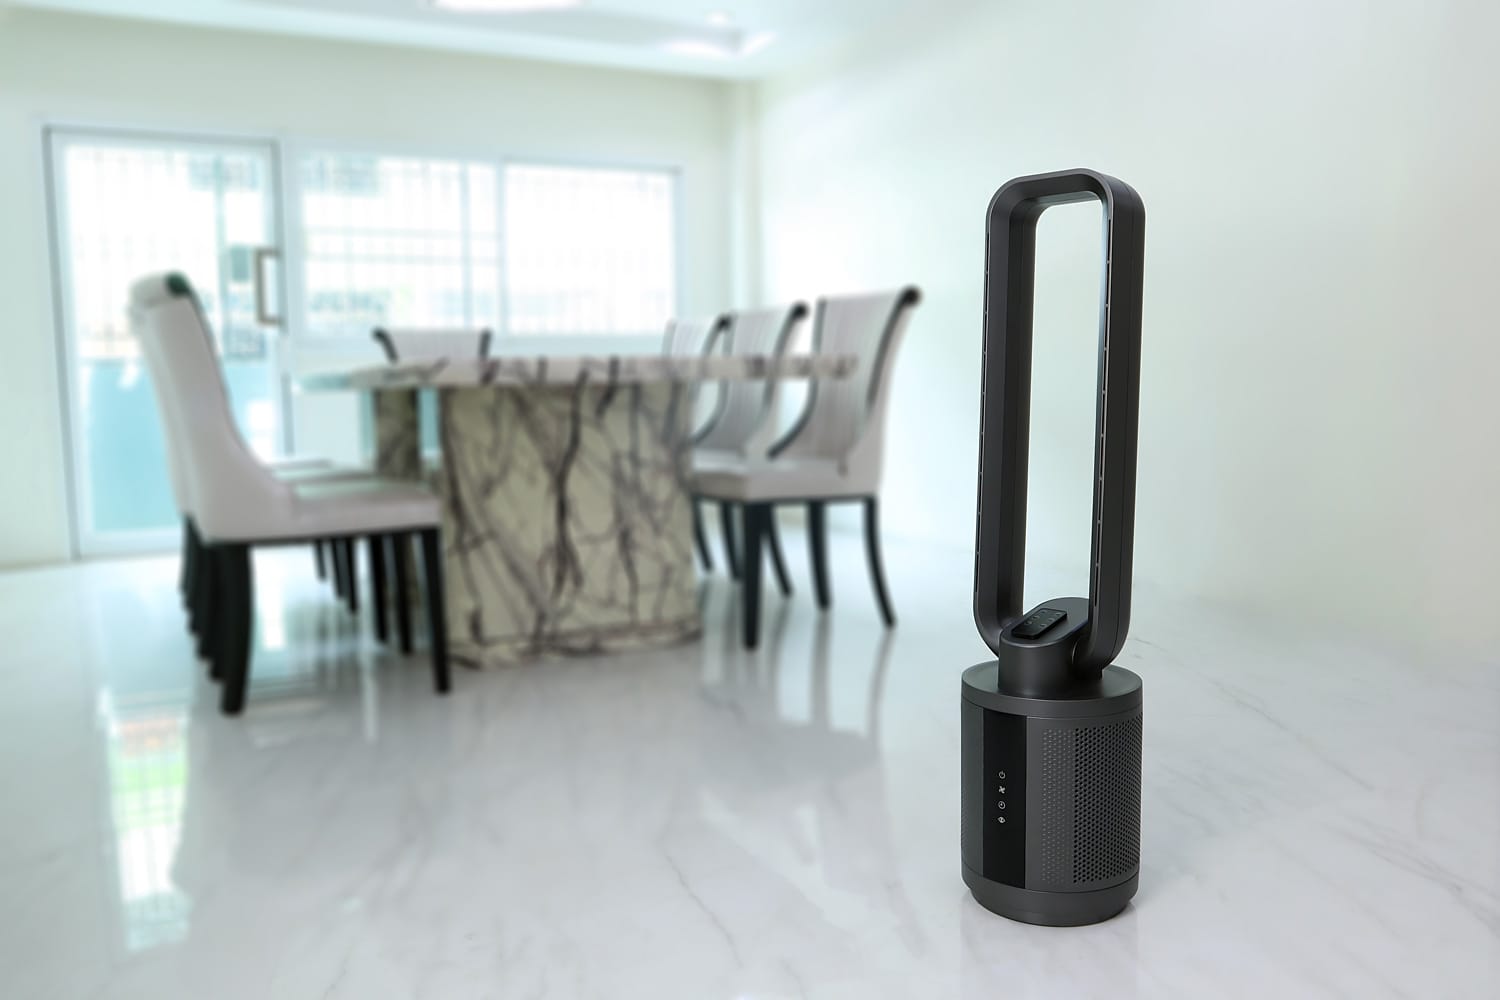 modern design black color bladeless purifying tower fan is on the floor of the dinning room to create fresh cool air ambient in the summer 